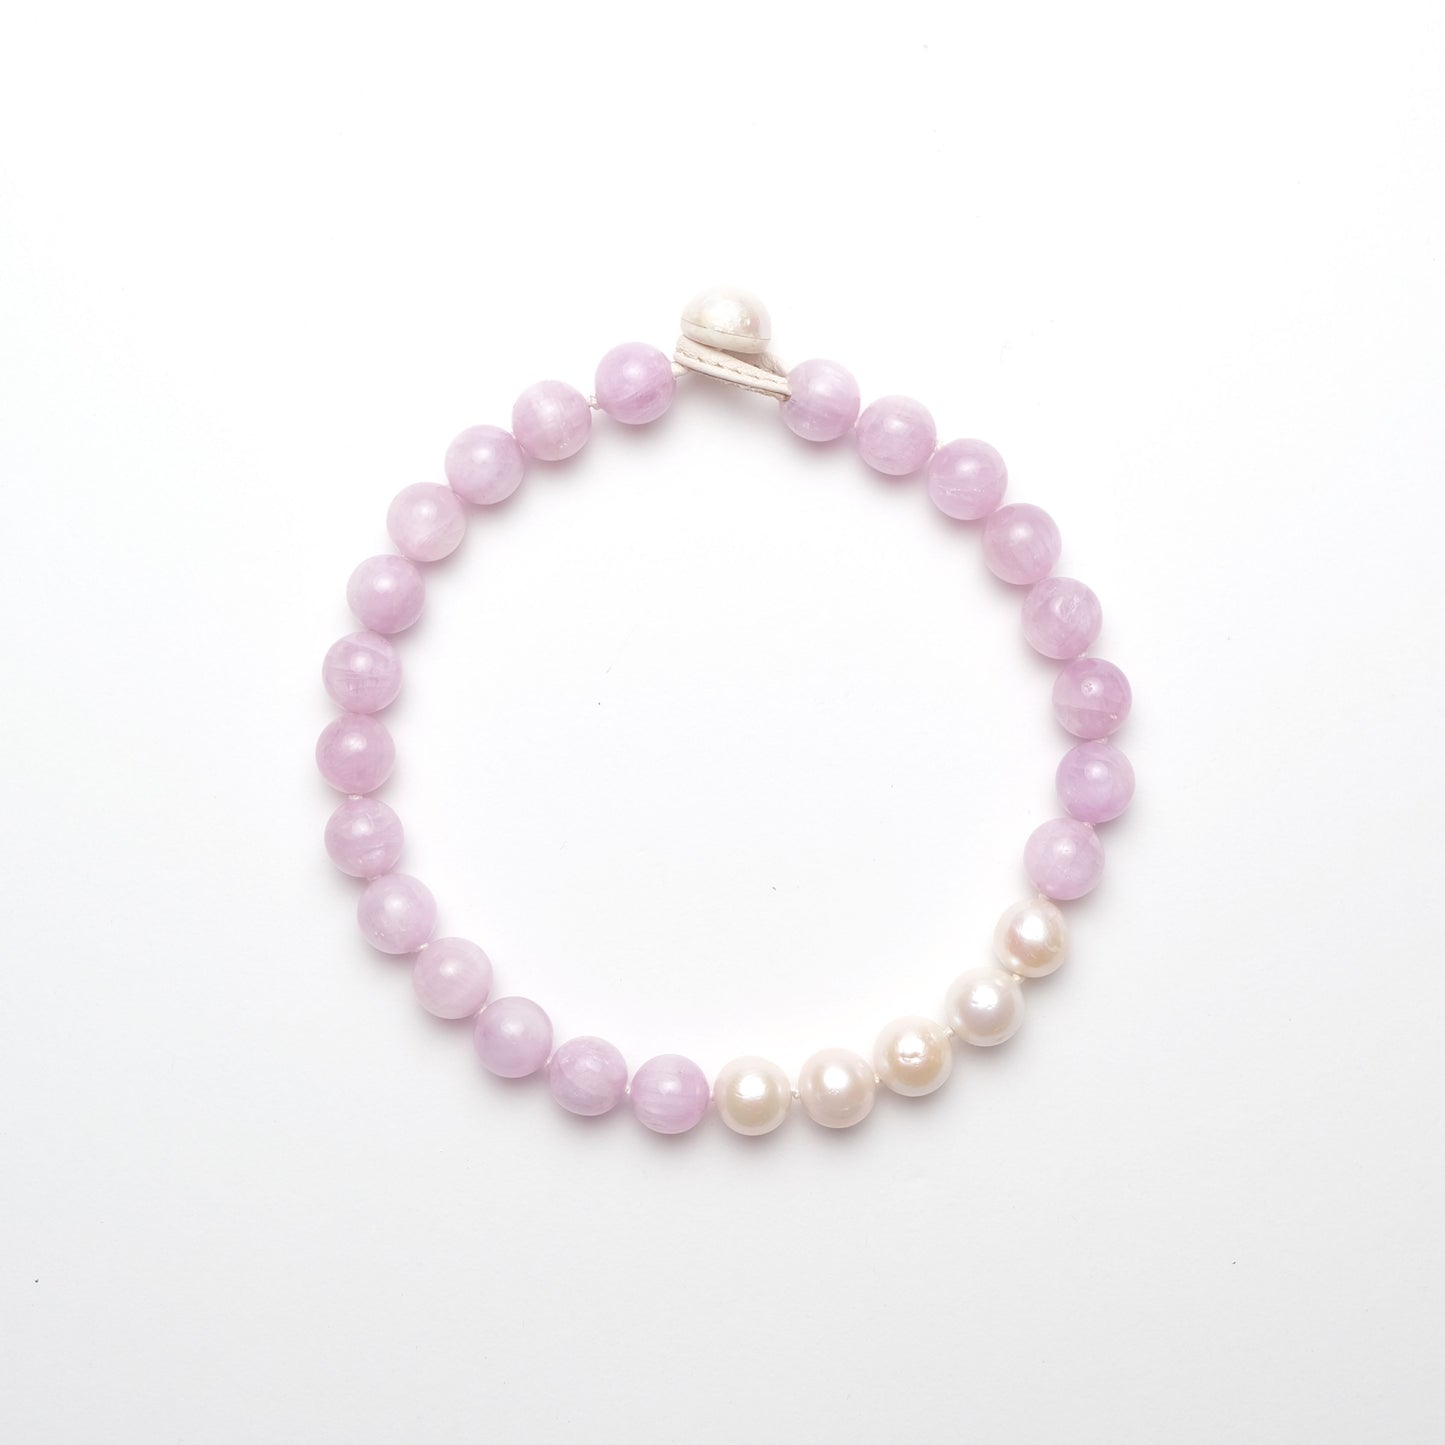 Necklace in lavender kunzite and pearls